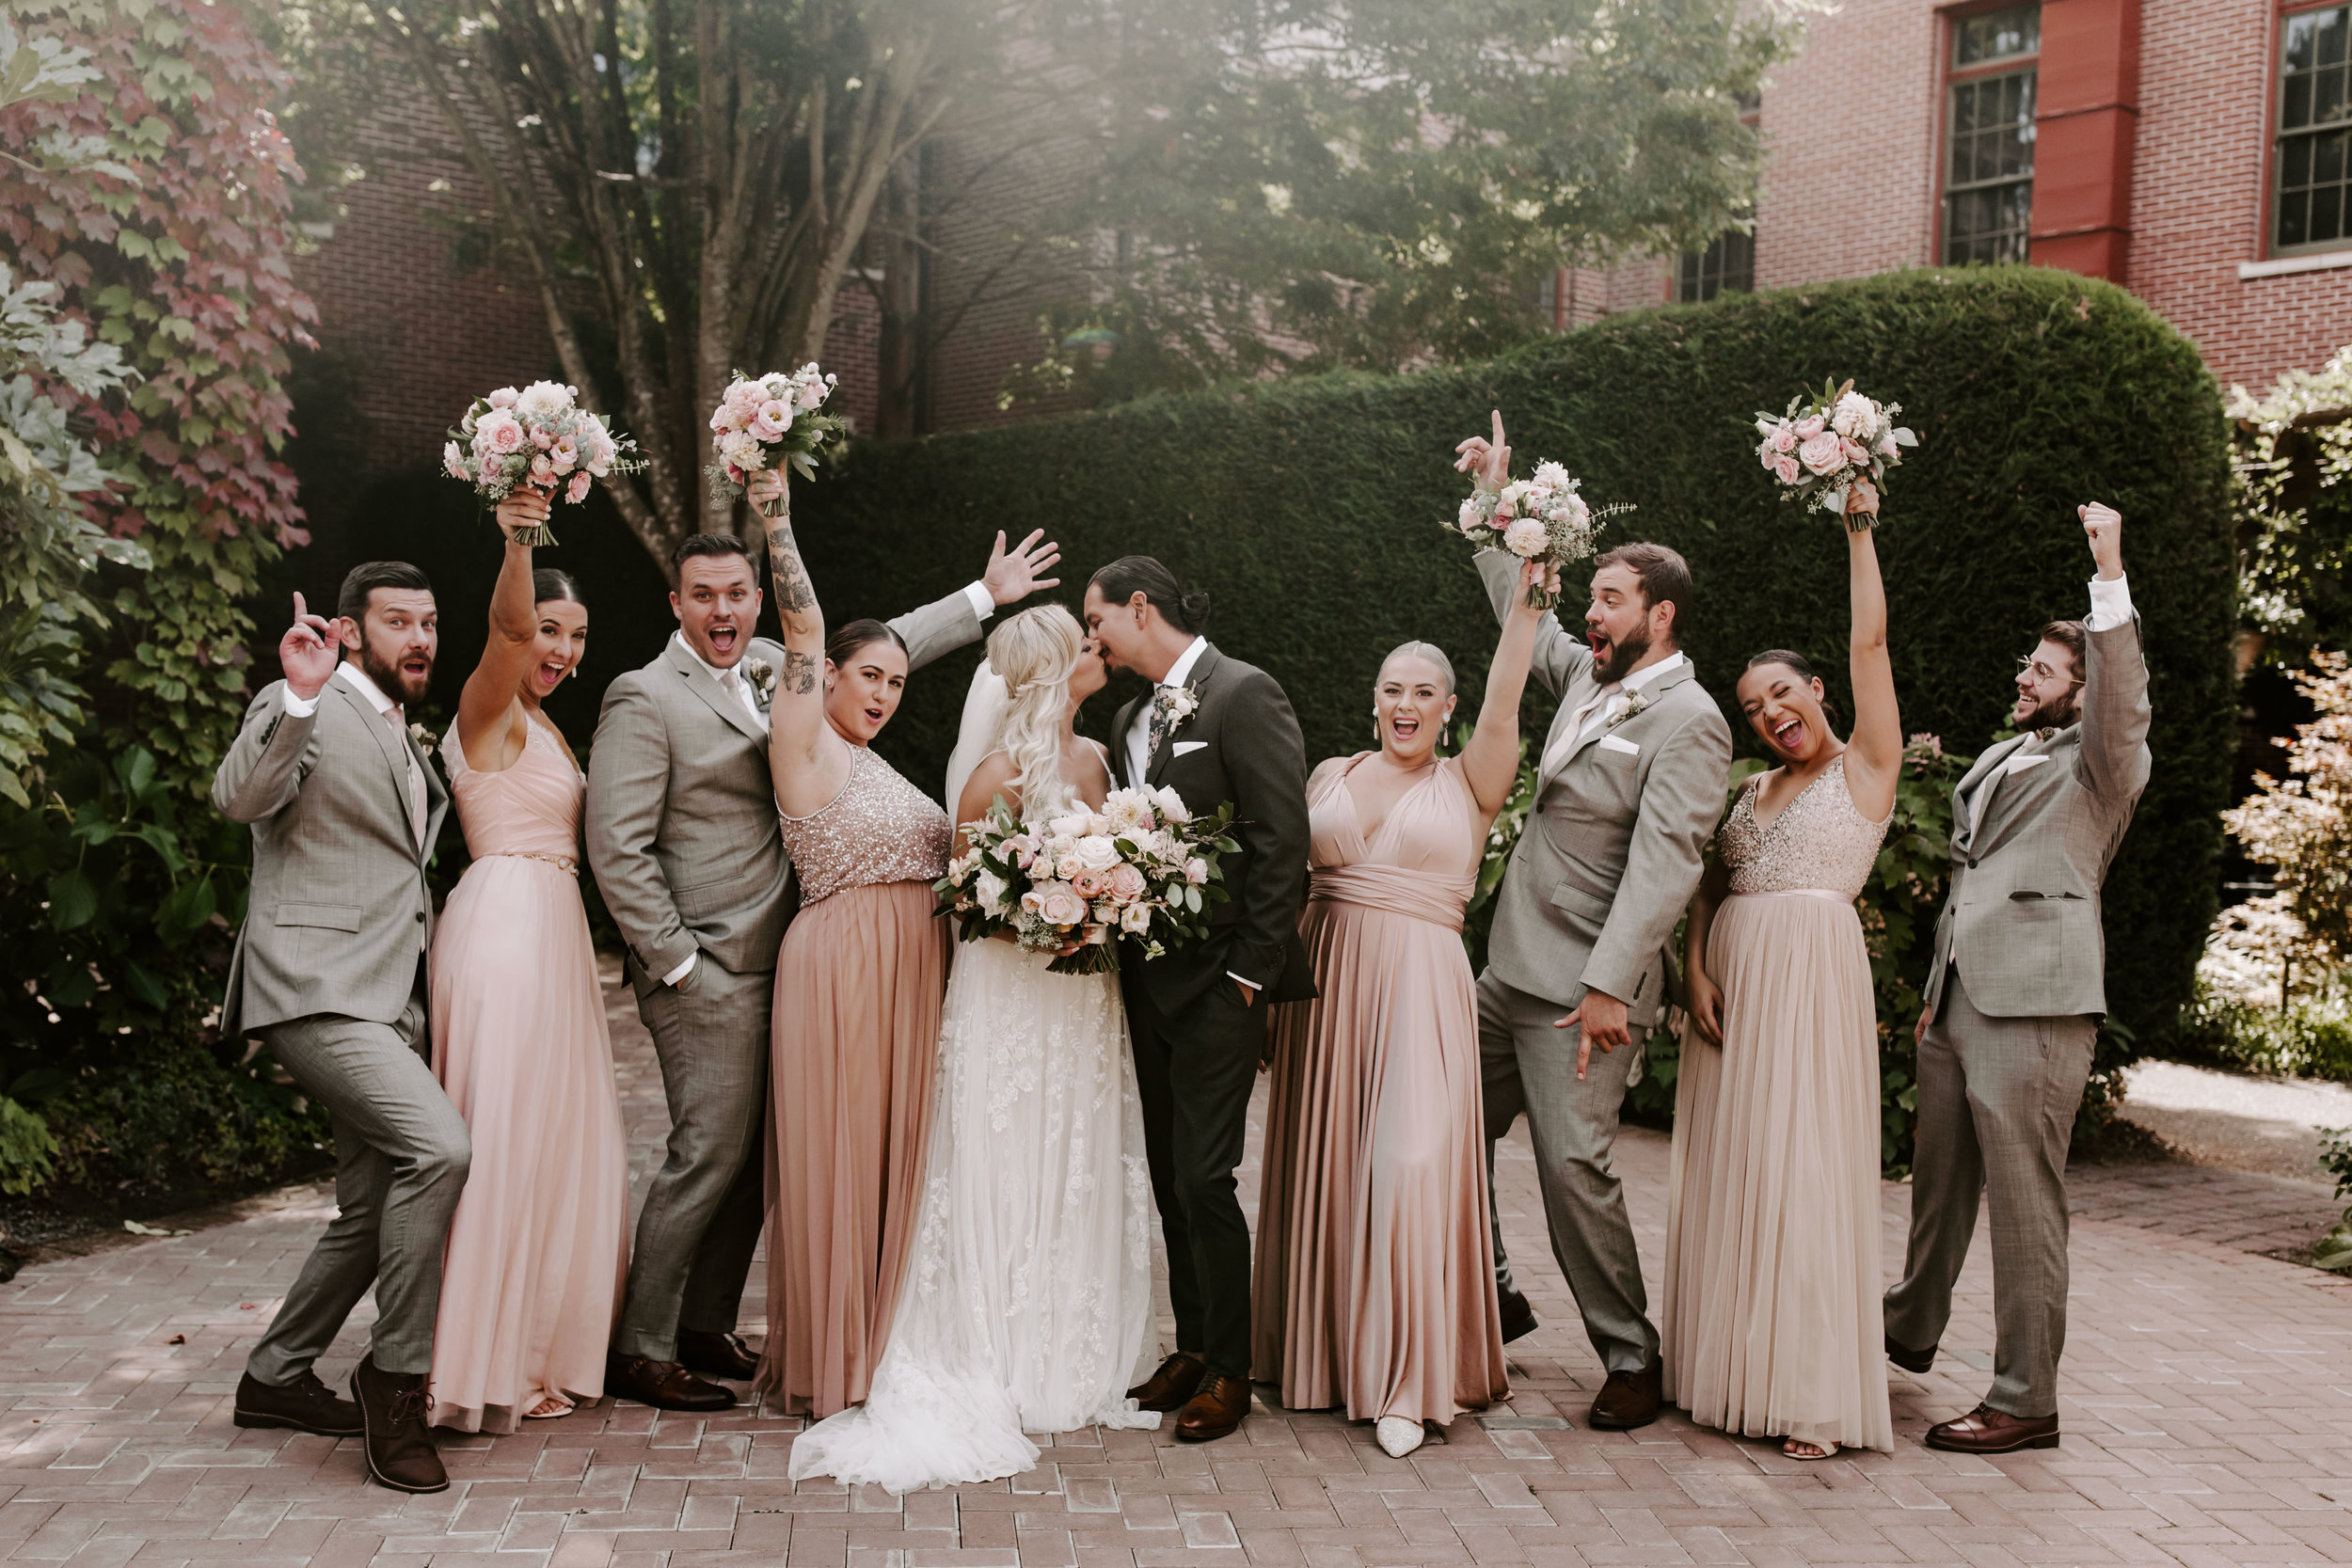 Rustic Bloom Photography | Bridal Party Inspiration | McMenamins Grand Lodge